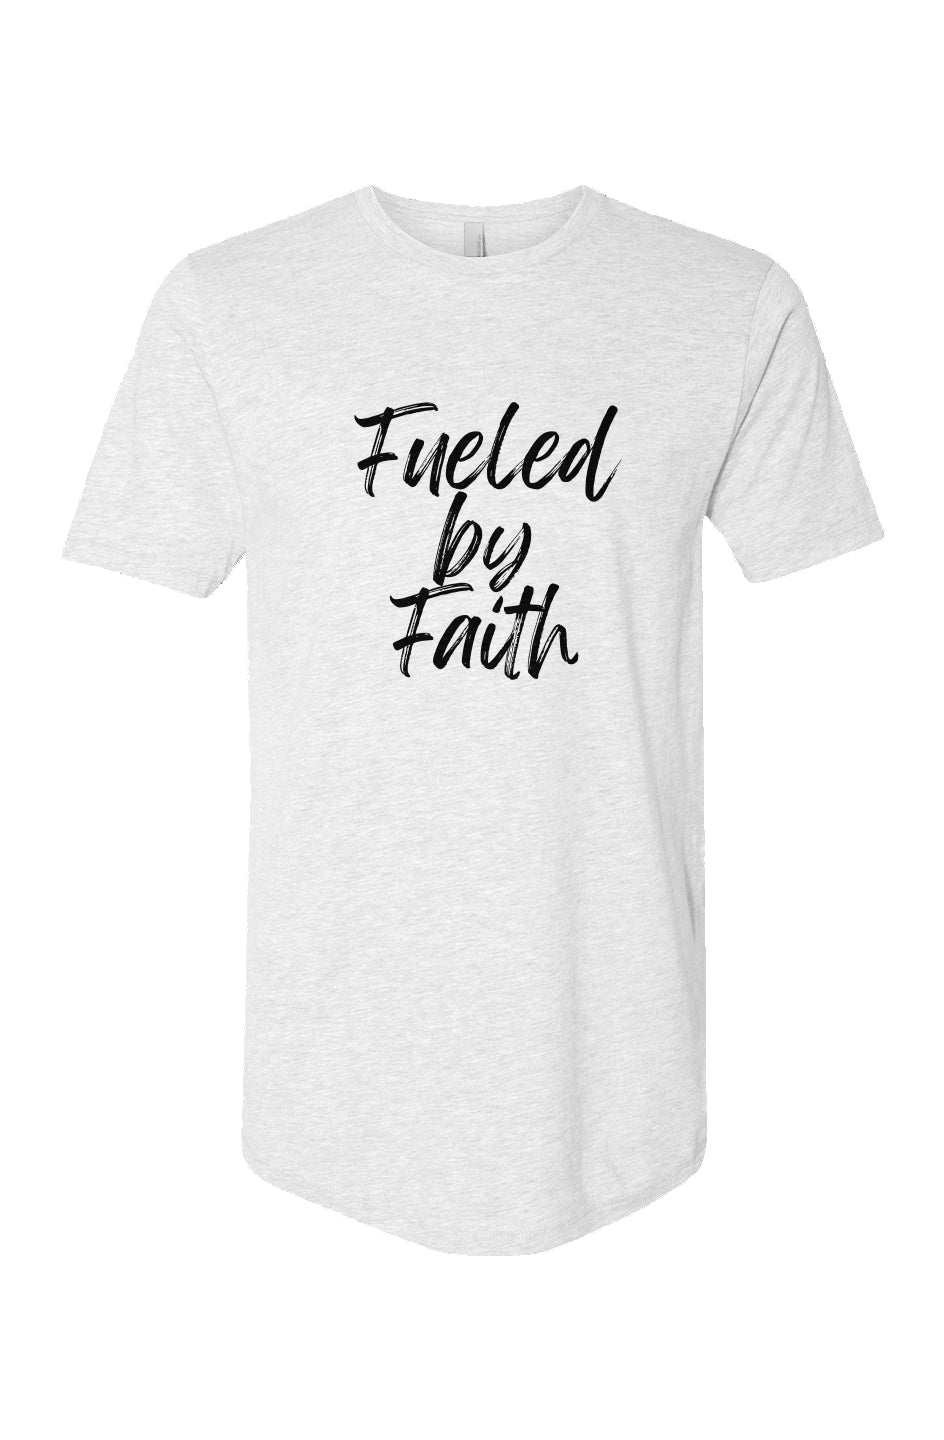 Fueled by faith for Cotton Long Body Short Sleeve Crew